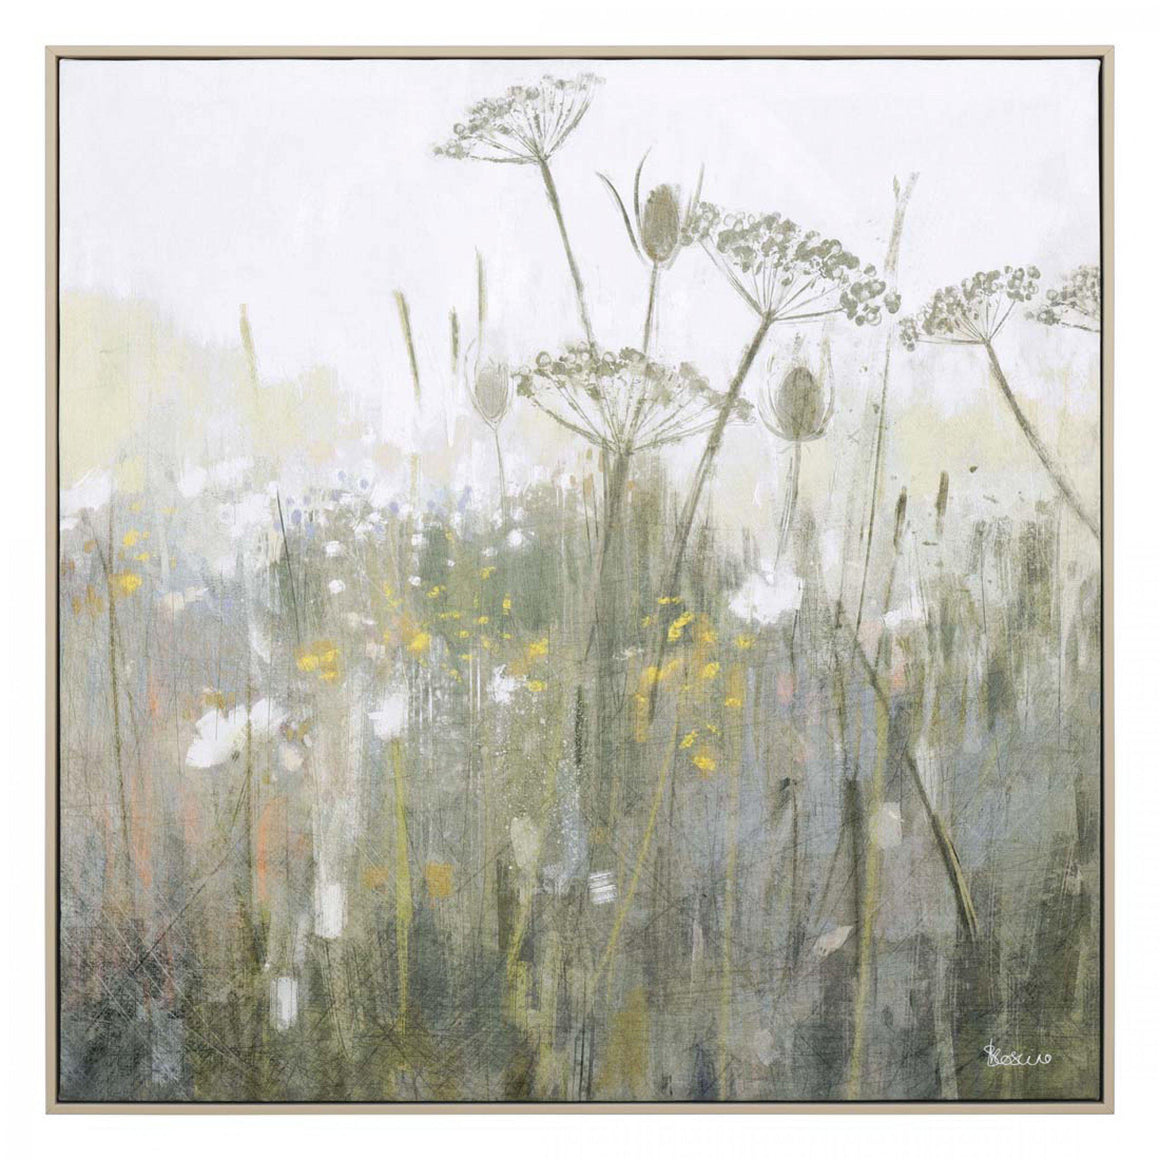  Serene and tranquil brushwood, meadow bright primulas and brambles during the winter times.